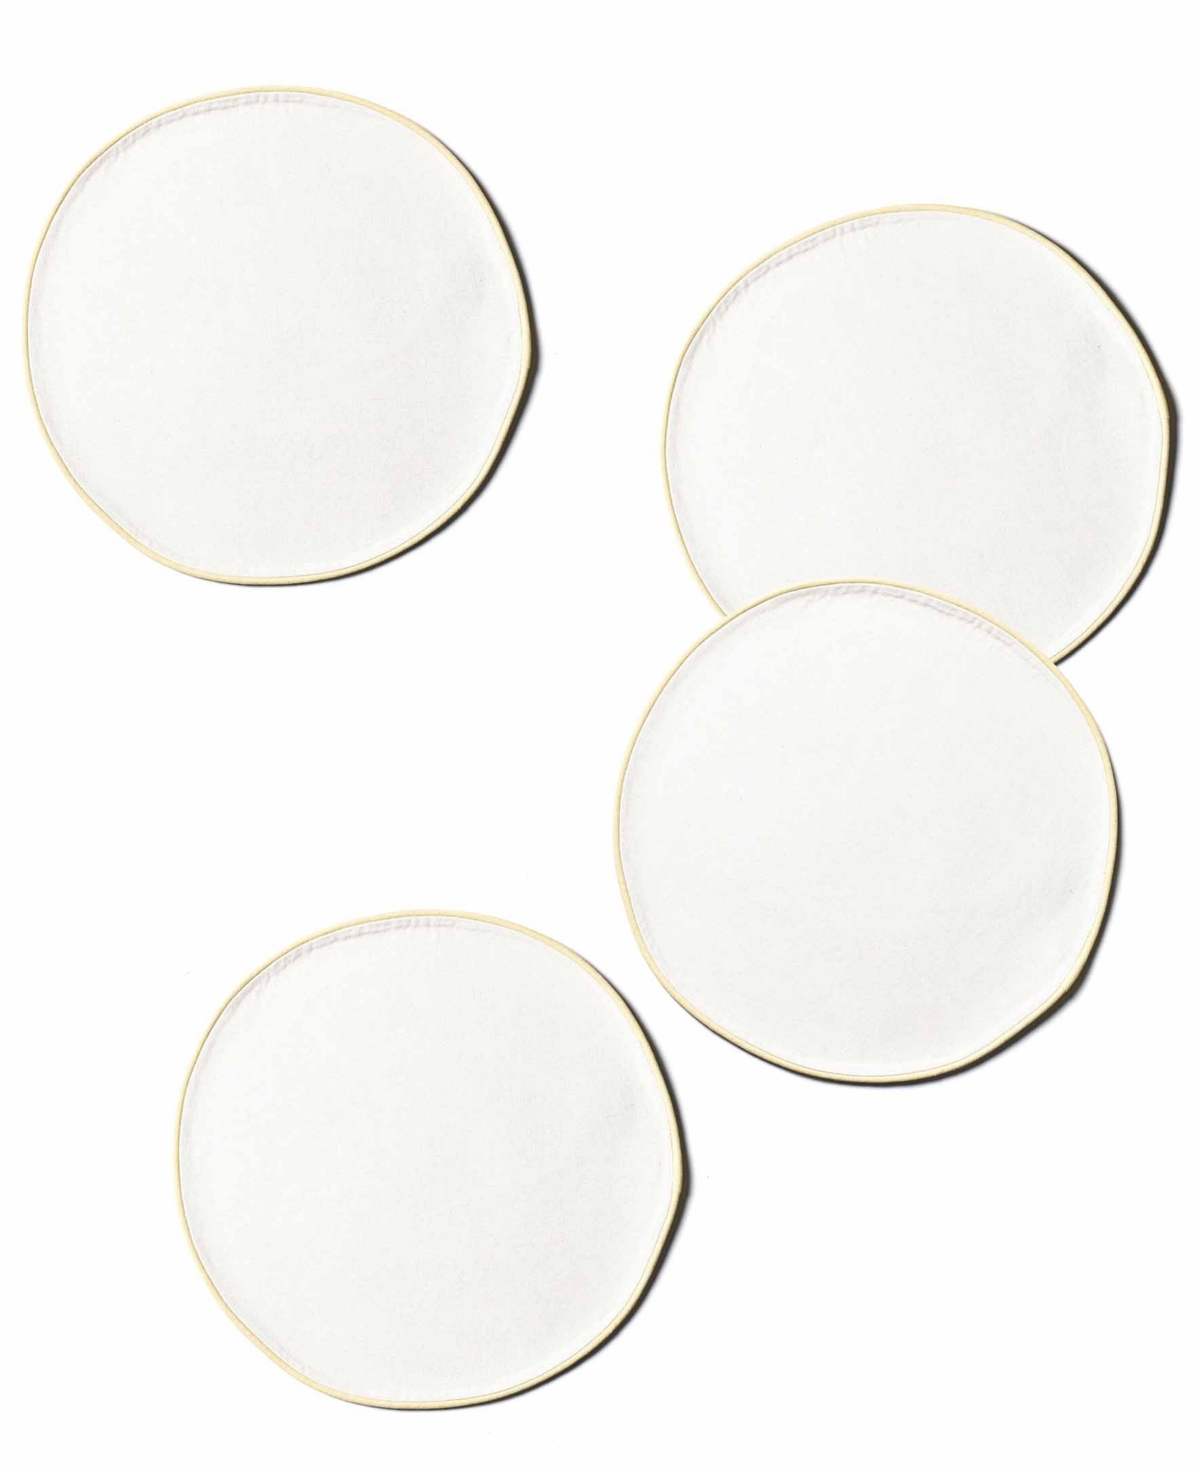 Coton Colors Block Round Placemat Set Of 4, Service For 4 In Ecru